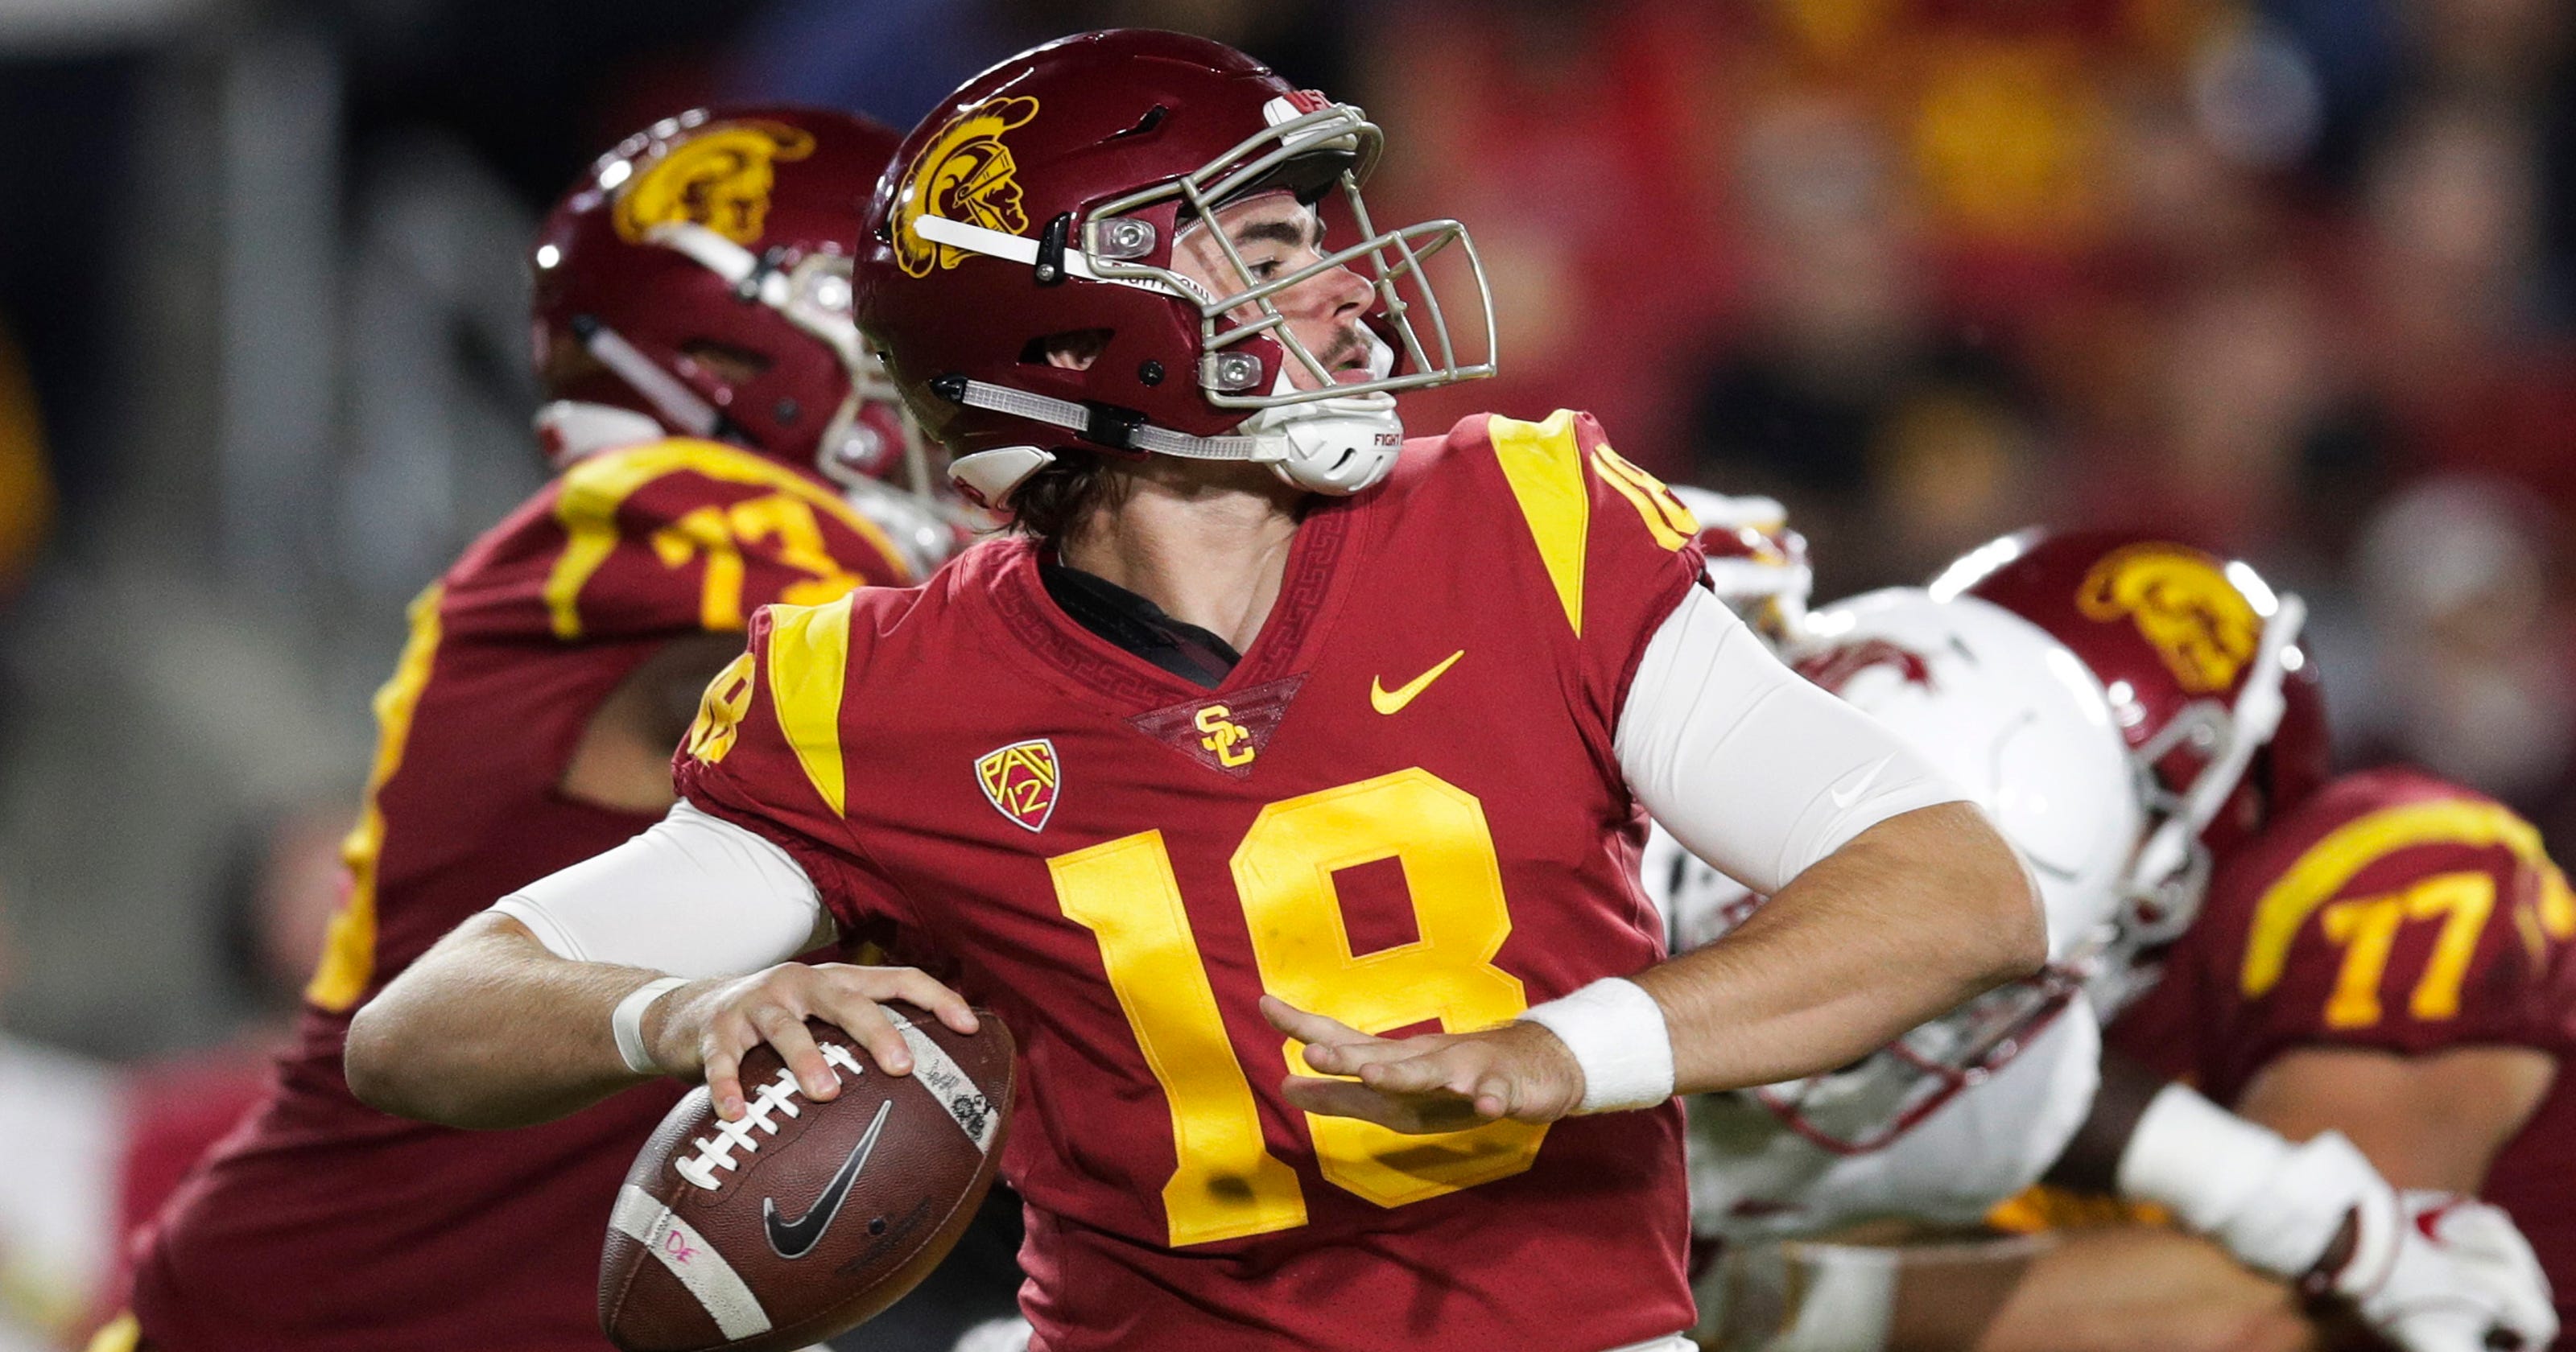 How to watch USC-Colorado football: What is the game time, TV channel